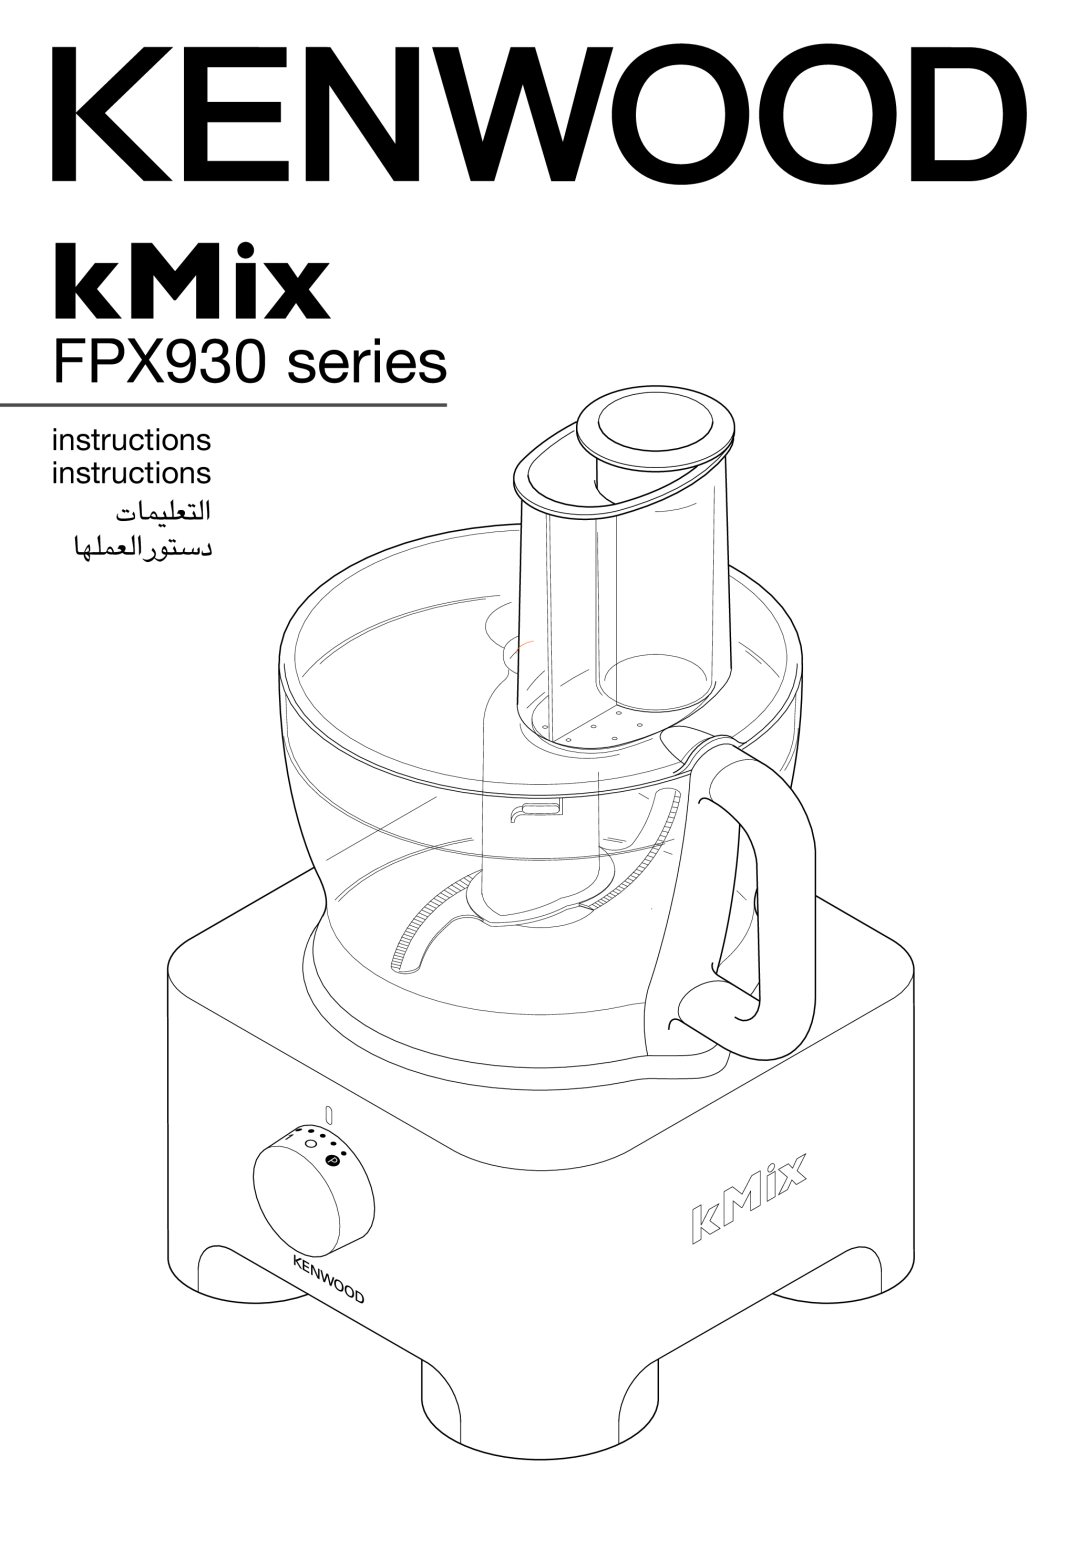 Kenwood FPX930 series manual instructions instructions 